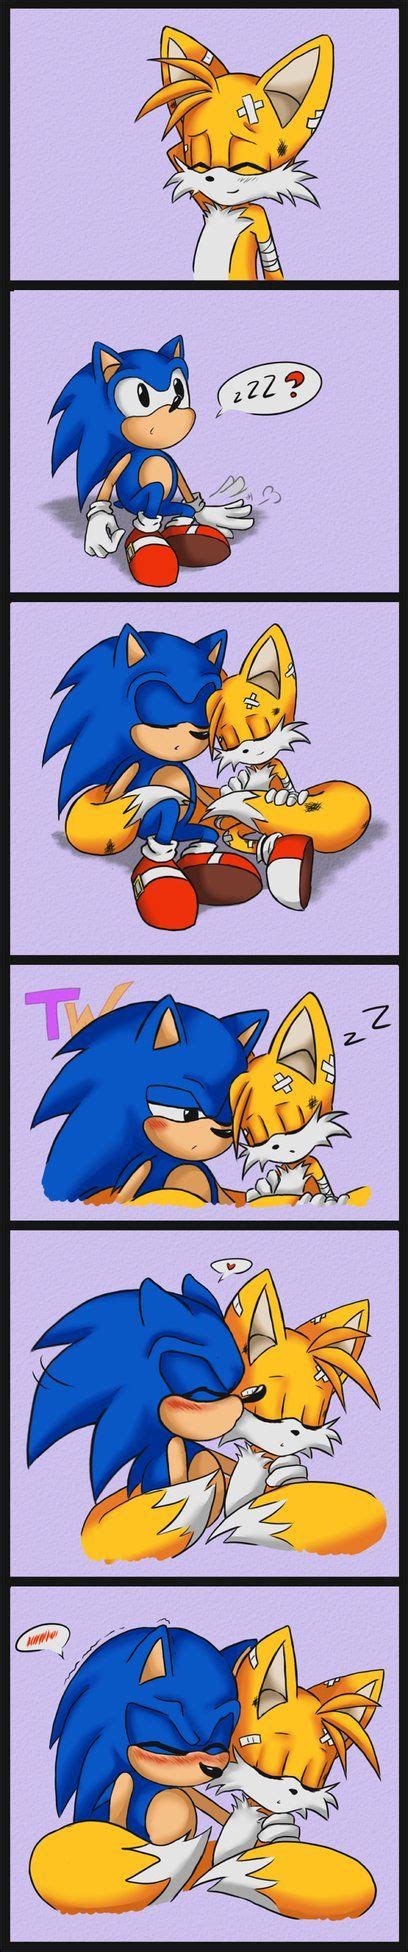 50 best sonic x tails images on pinterest fanfiction hedgehog and hedgehogs